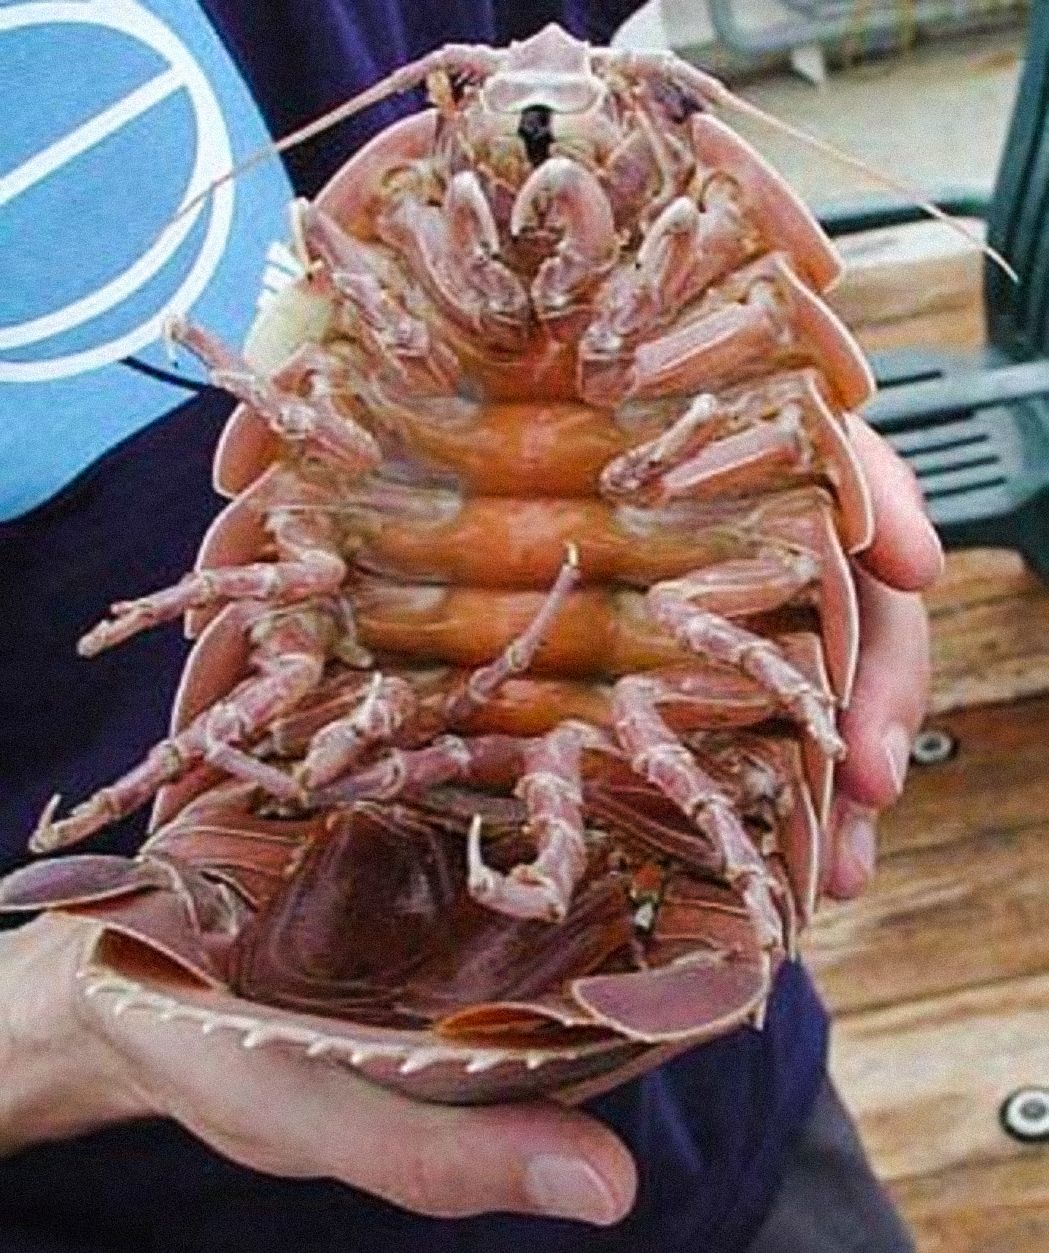 A giant isopod (Bathynomus giganteus) may reach up to 0.76 m (2 ft 6 in) in length.